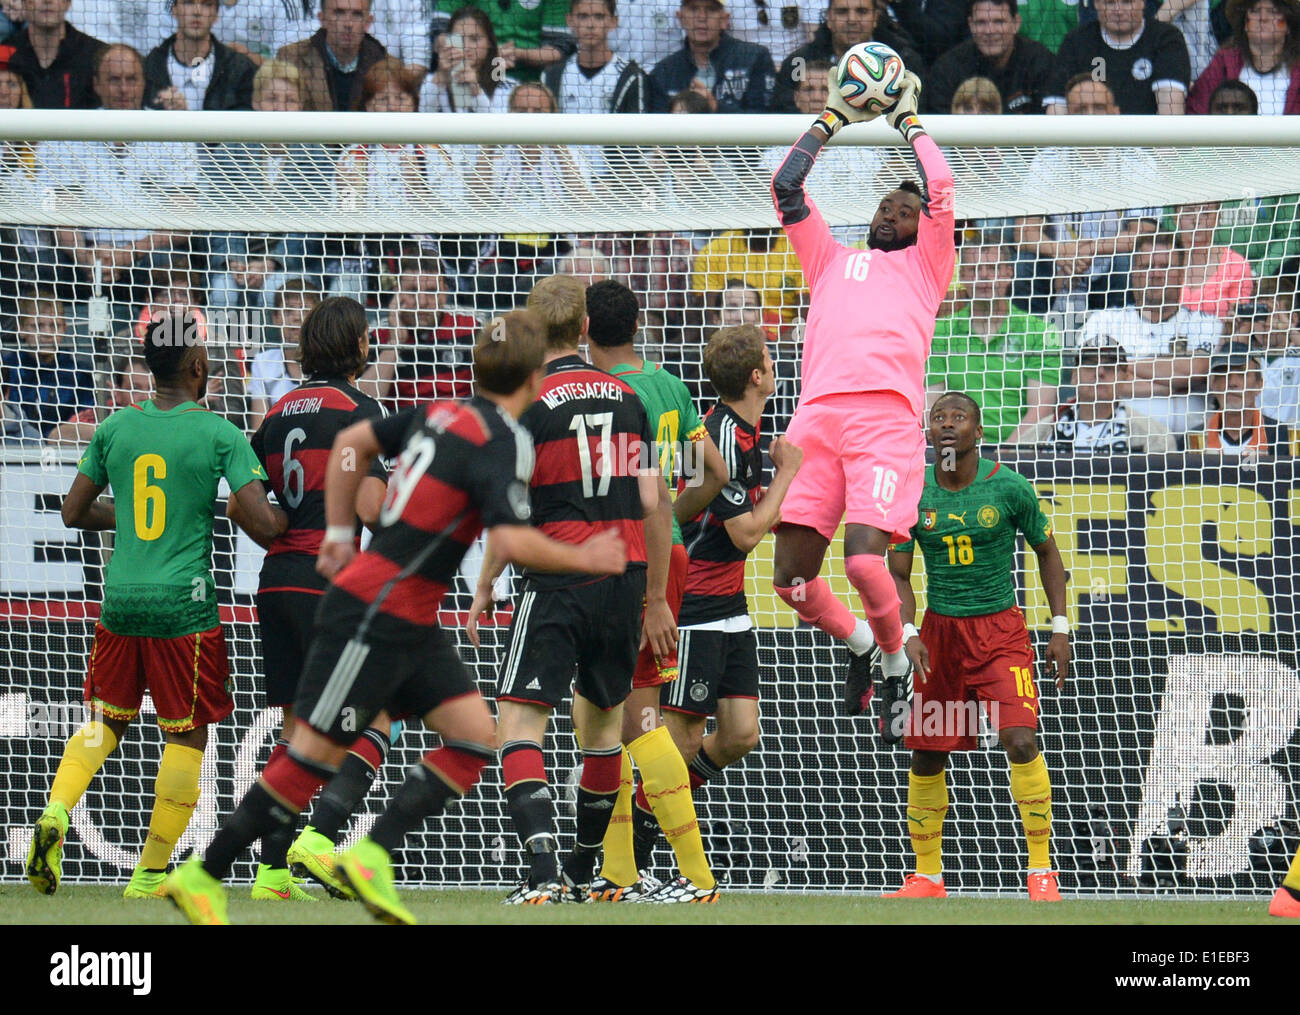 Moenchengladbach, Germany. 01st June, 2014. Cameroon's goalkeeper Charles Itandje in action during the friendly soccer match between Germany and Cameroon at the Borussia Park stadium in Moenchengladbach, Germany, 01 June 2014. Photo: Bernd Thissen/dpa/Alamy Live News Stock Photo